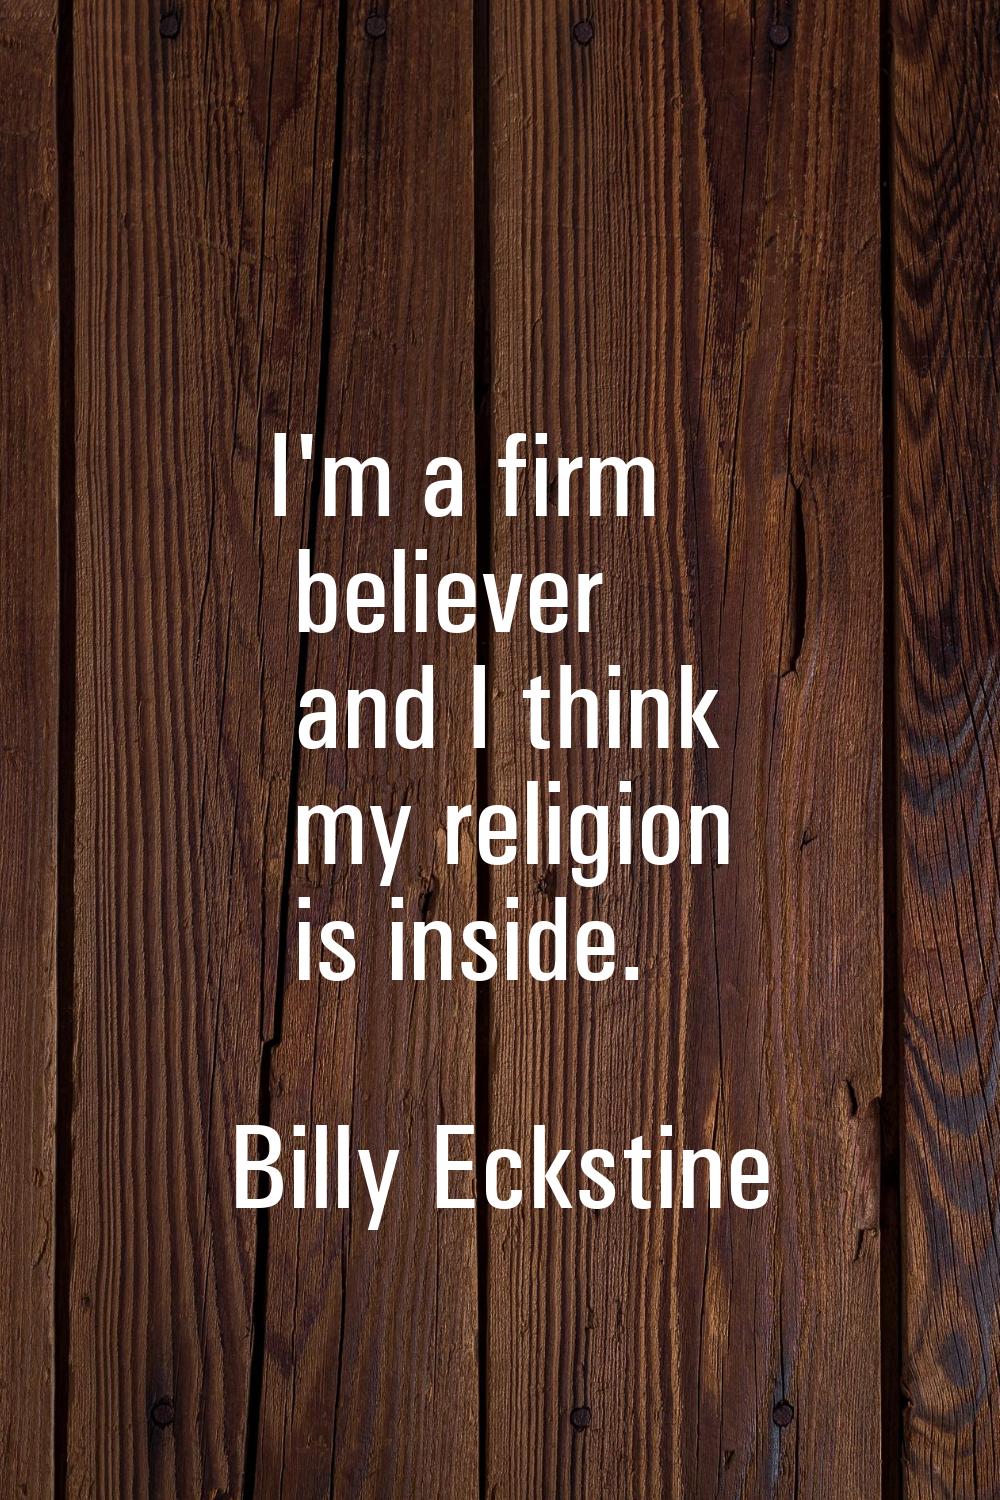 I'm a firm believer and I think my religion is inside.